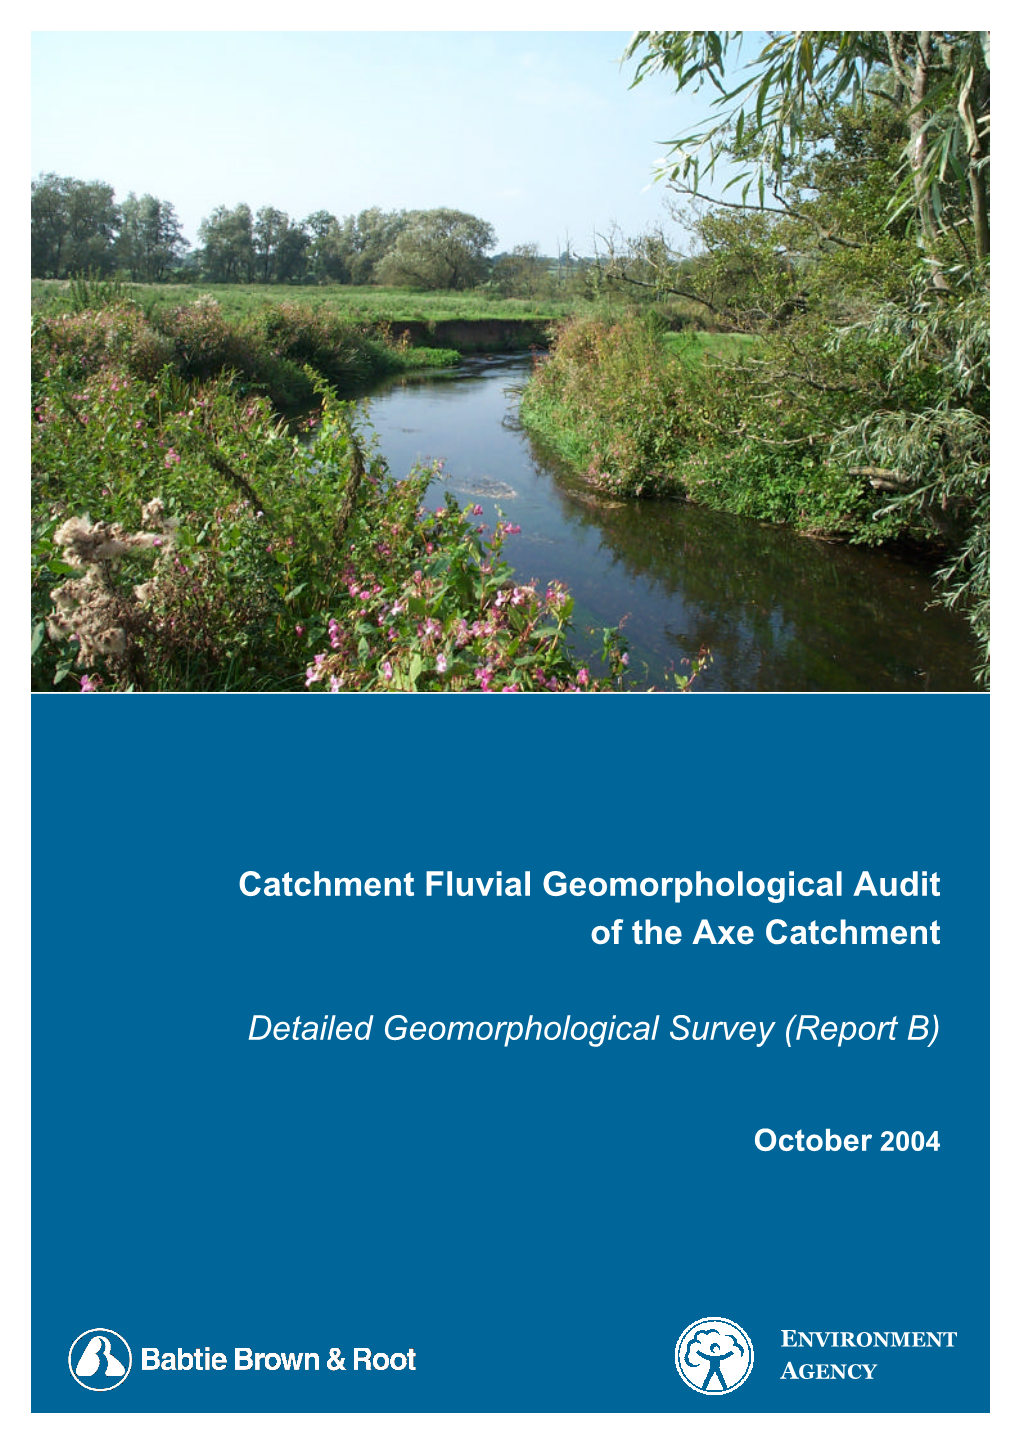 Catchment Fluvial Geomorphological Audit of the Axe Catchment Detailed Geomorphological Survey (Report B)